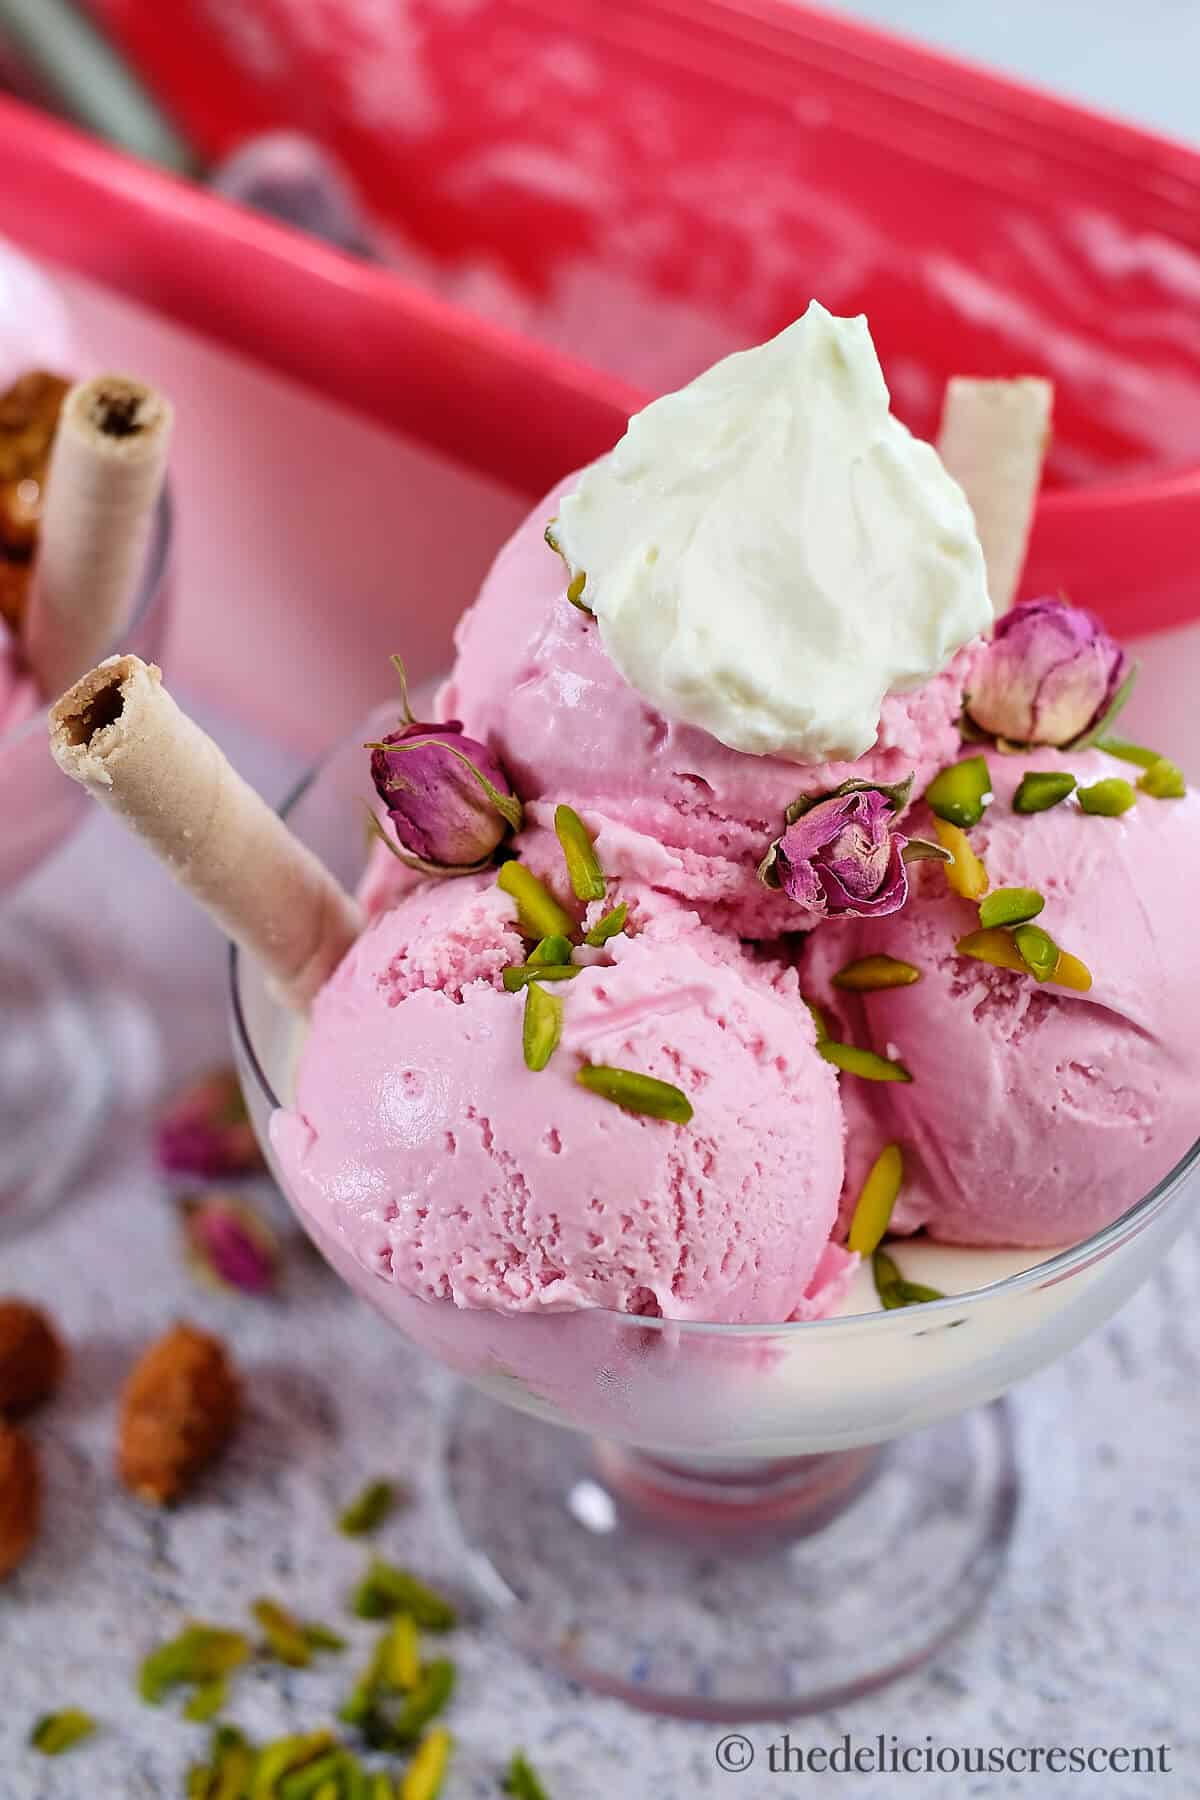 Scoops of rose ice cream in a bowl.